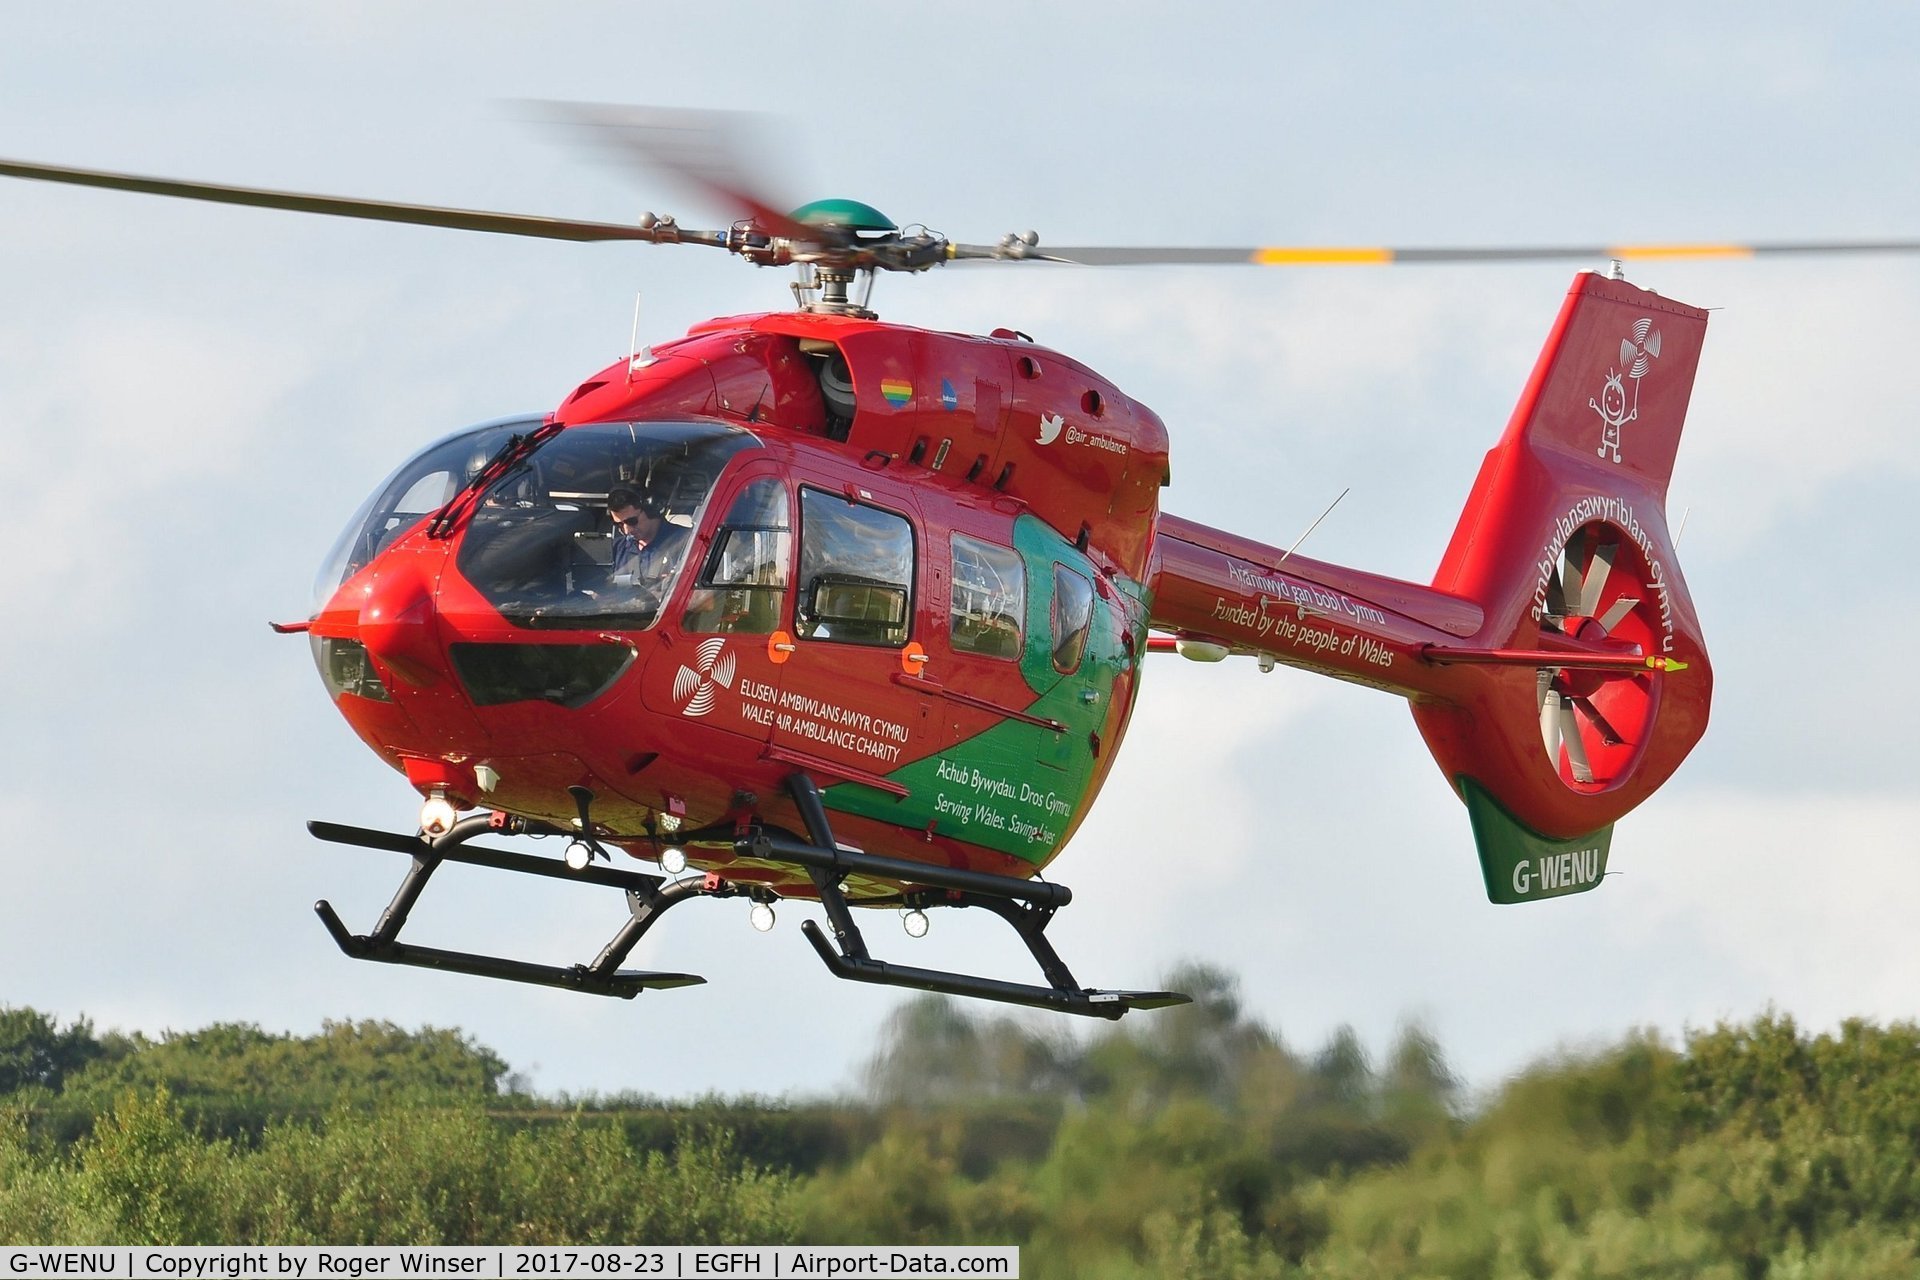 G-WENU, 2016 Airbus Helicopters H-145 (BK-117D-2) C/N 20112, Dafen, Carmarthenshire based Wales Air Ambulance helicopter (Helimed 57).